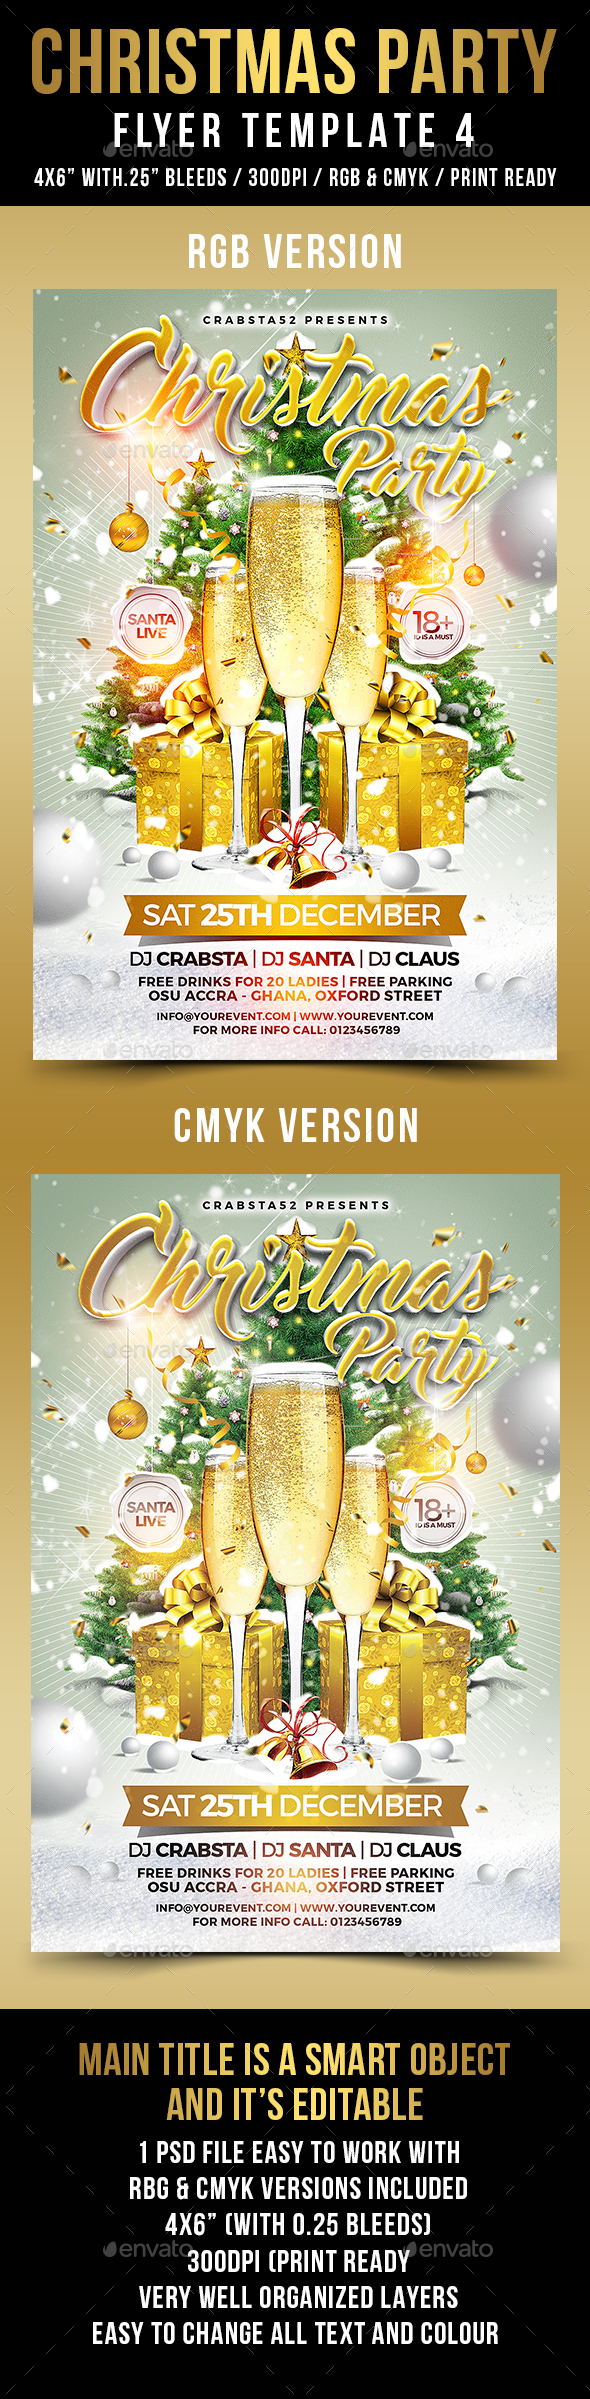 Christmas Party Flyer Template 4